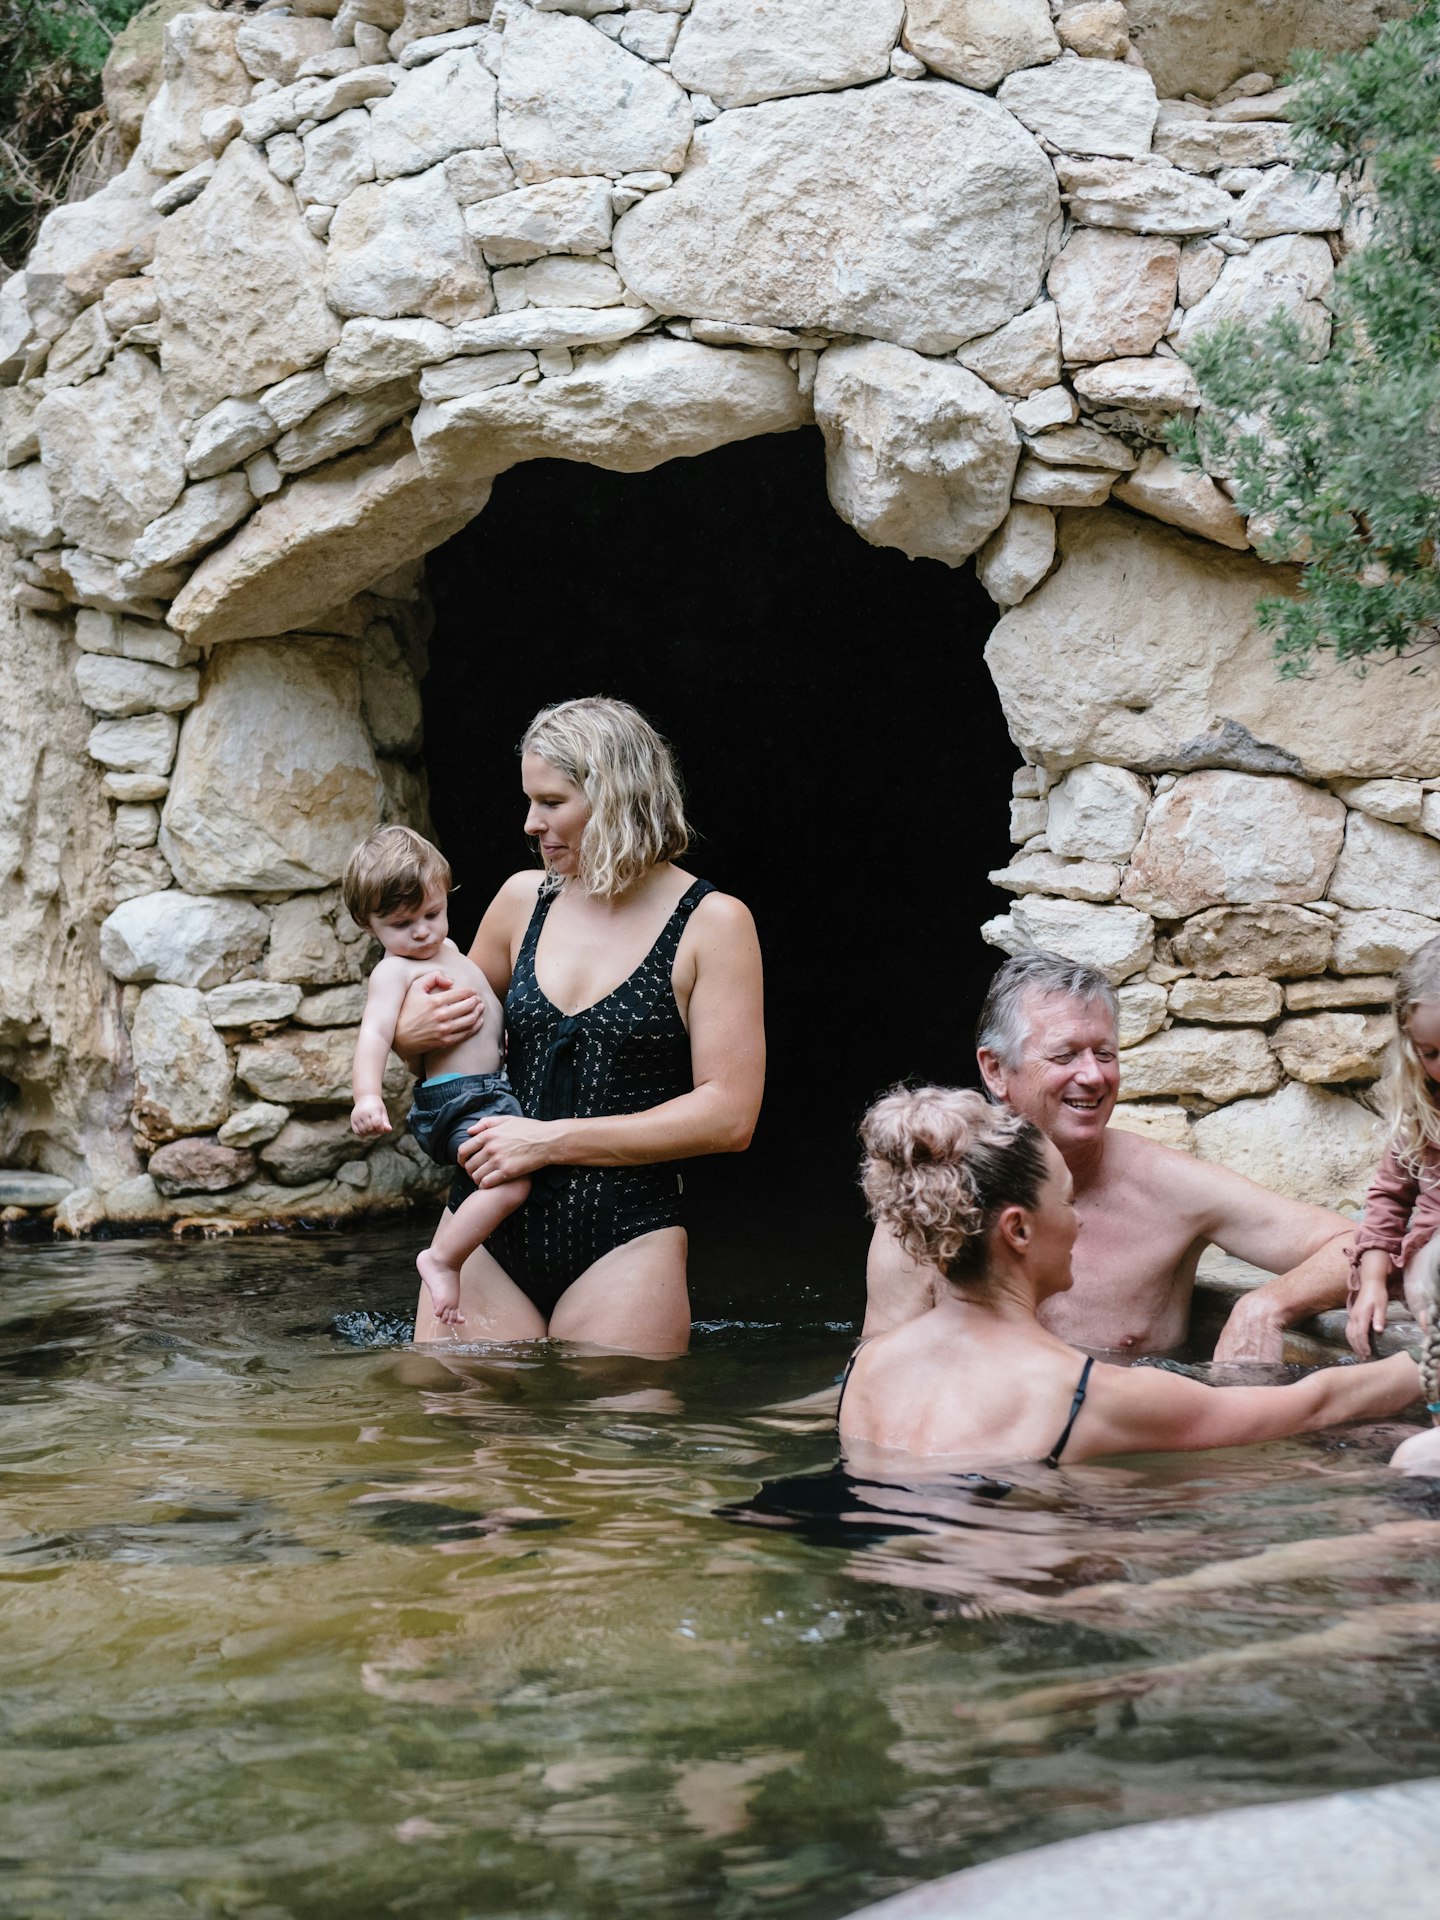 group of women and children bathing in geothermal baths with the opening of a cave in the background